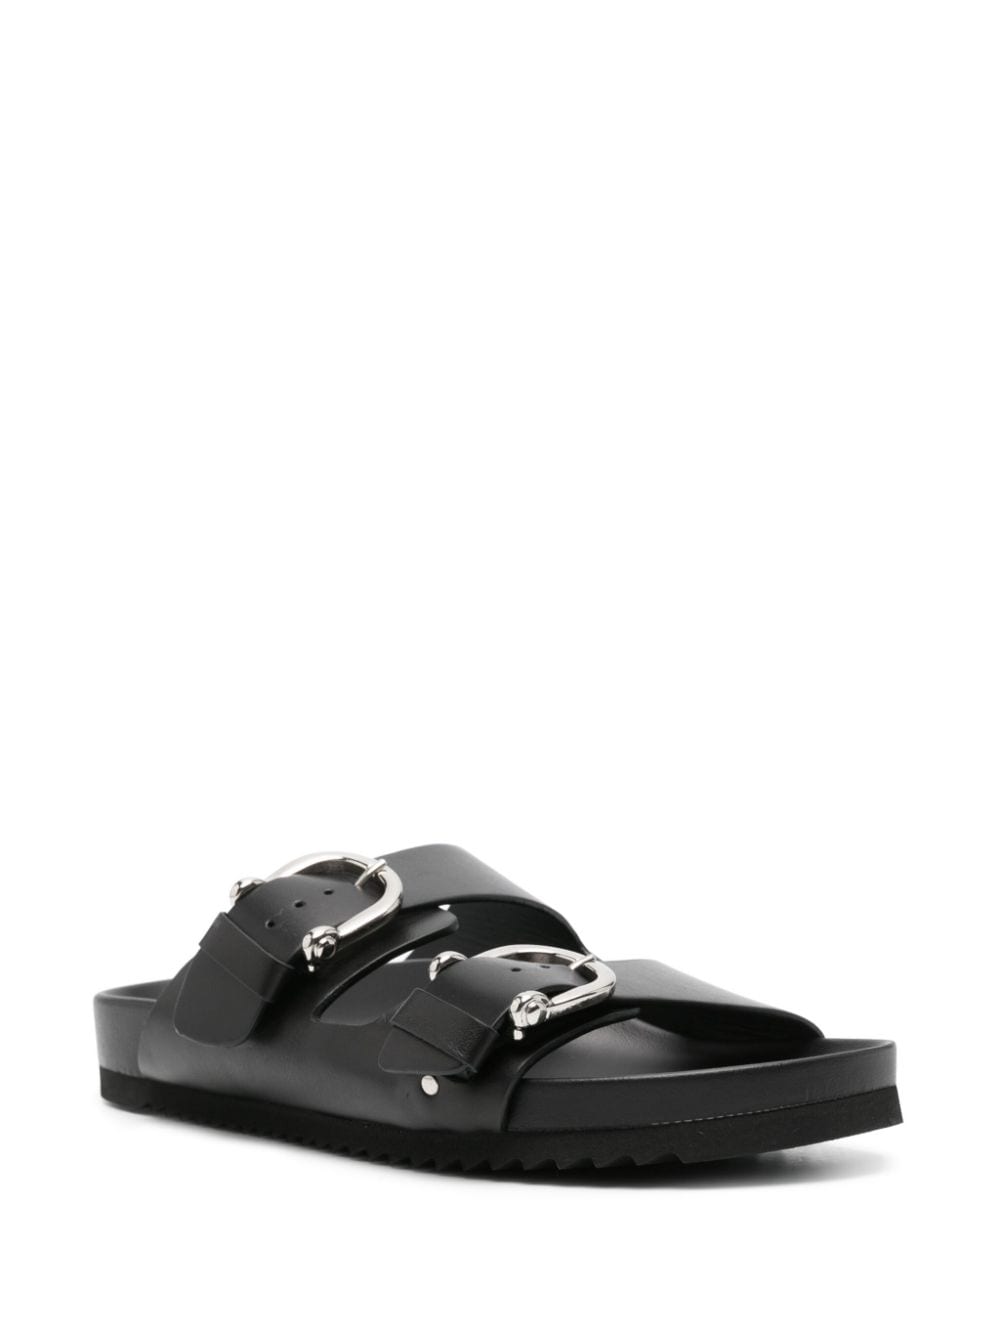 P.A.R.O.S.H. buckled leather sandals - Zwart